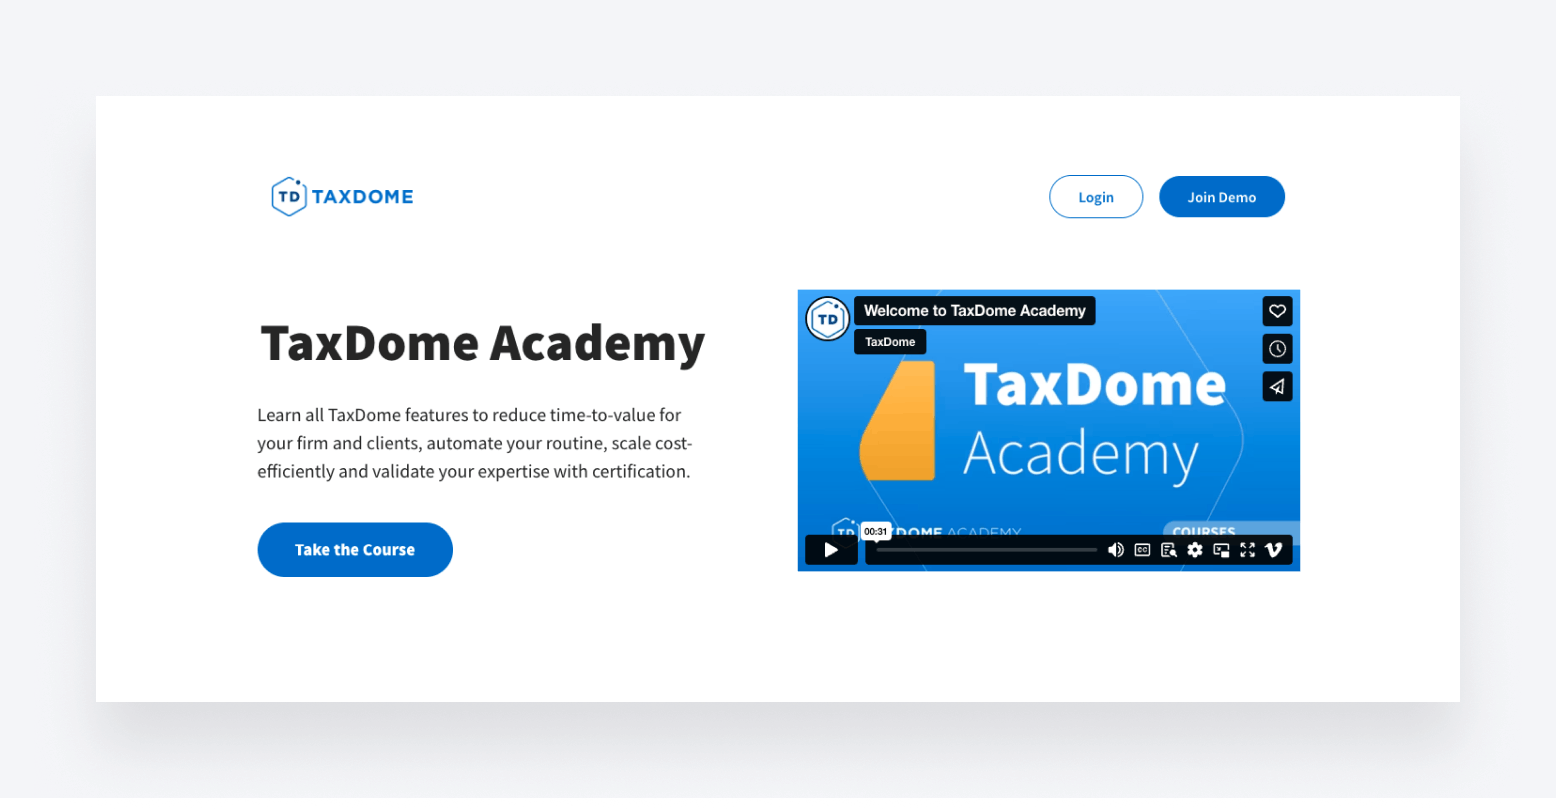 The main webpage for TaxDome Academy, where you can watch a welcome video and start various courses.